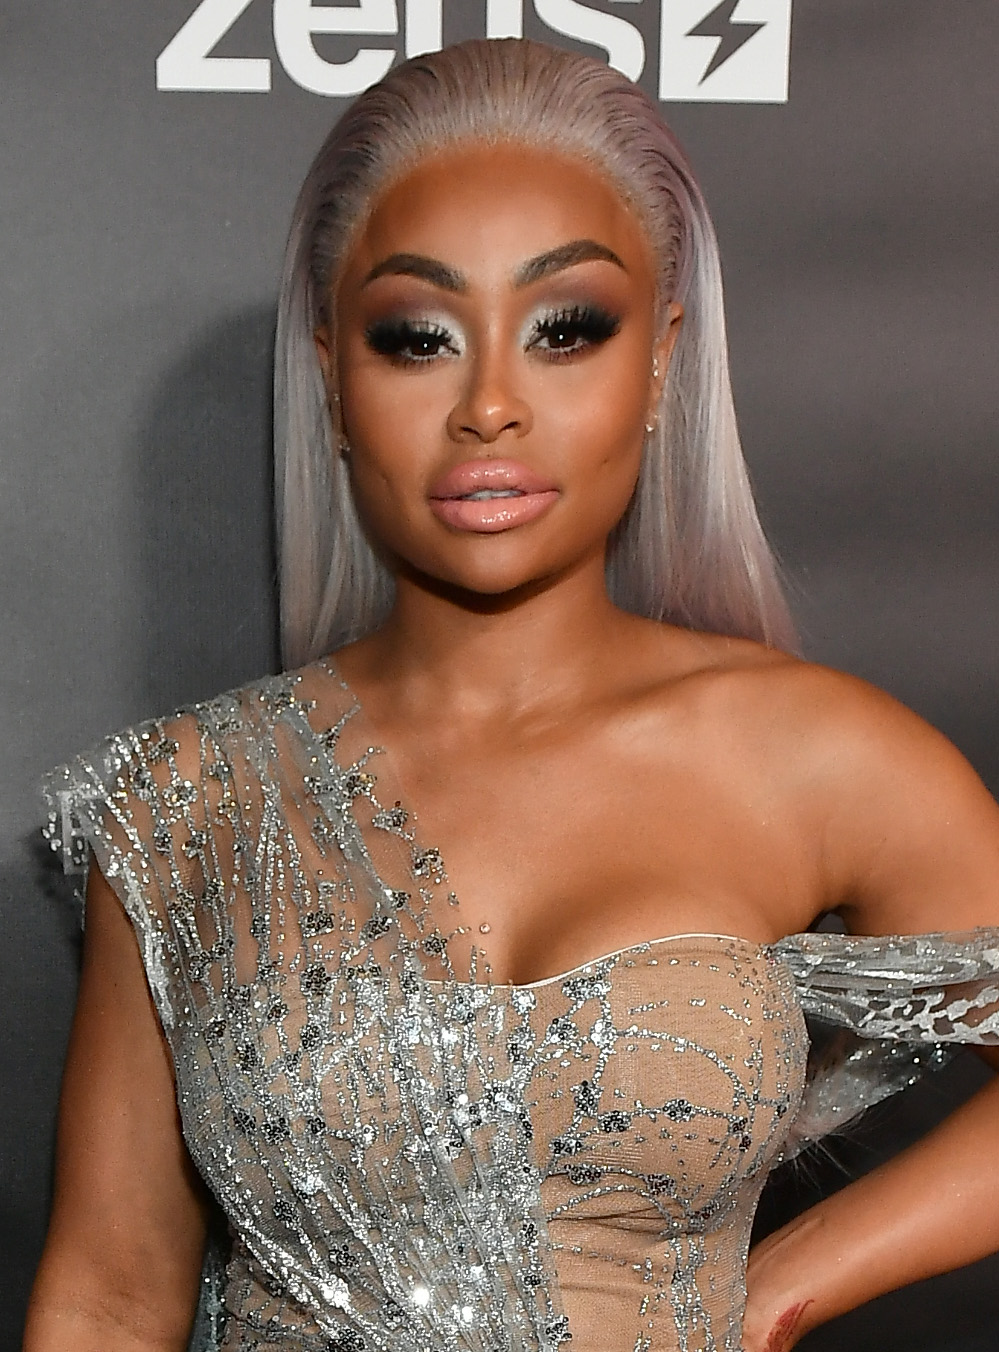 Blac Chyna Forges Phony Ultrasound Sparking Pregnancy Rumors | Bossip